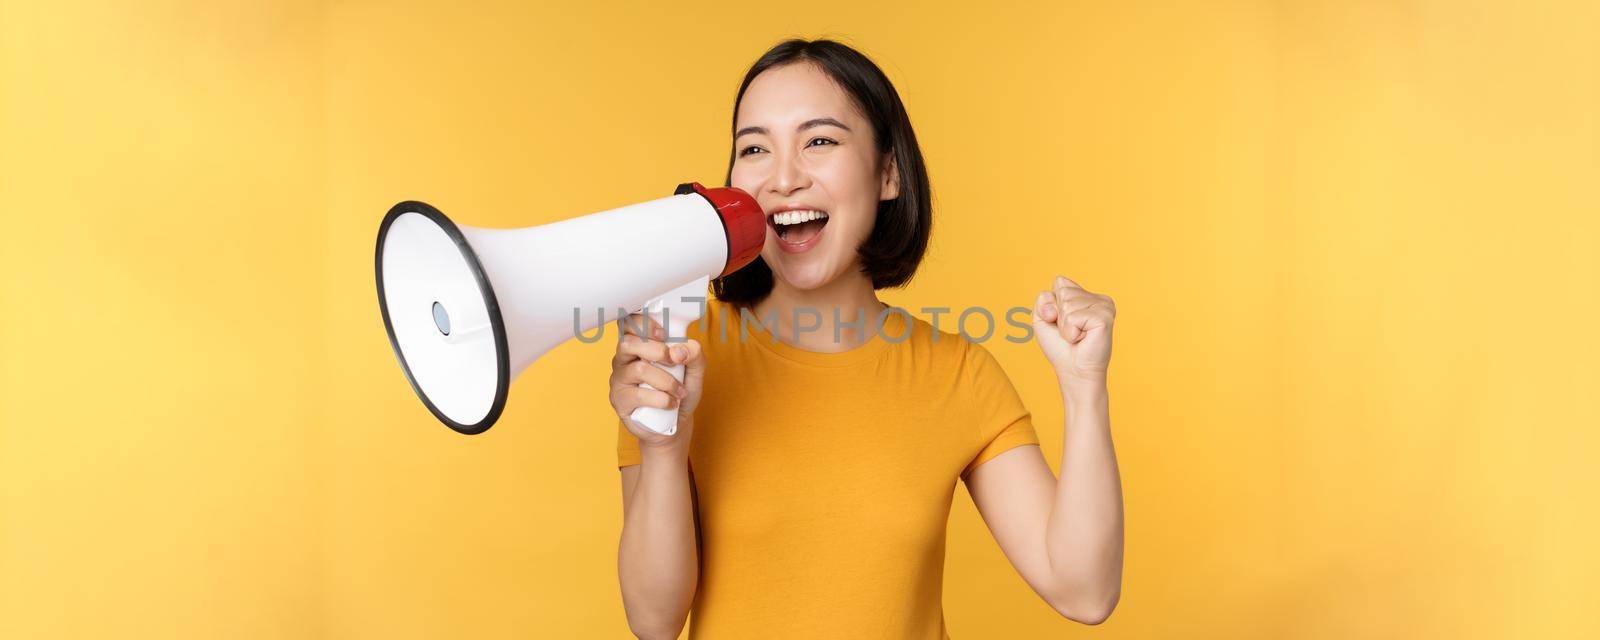 Announcement. Happy asian woman shouting loud at megaphone, recruiting, protesting with speaker in hands, standing over yellow background.